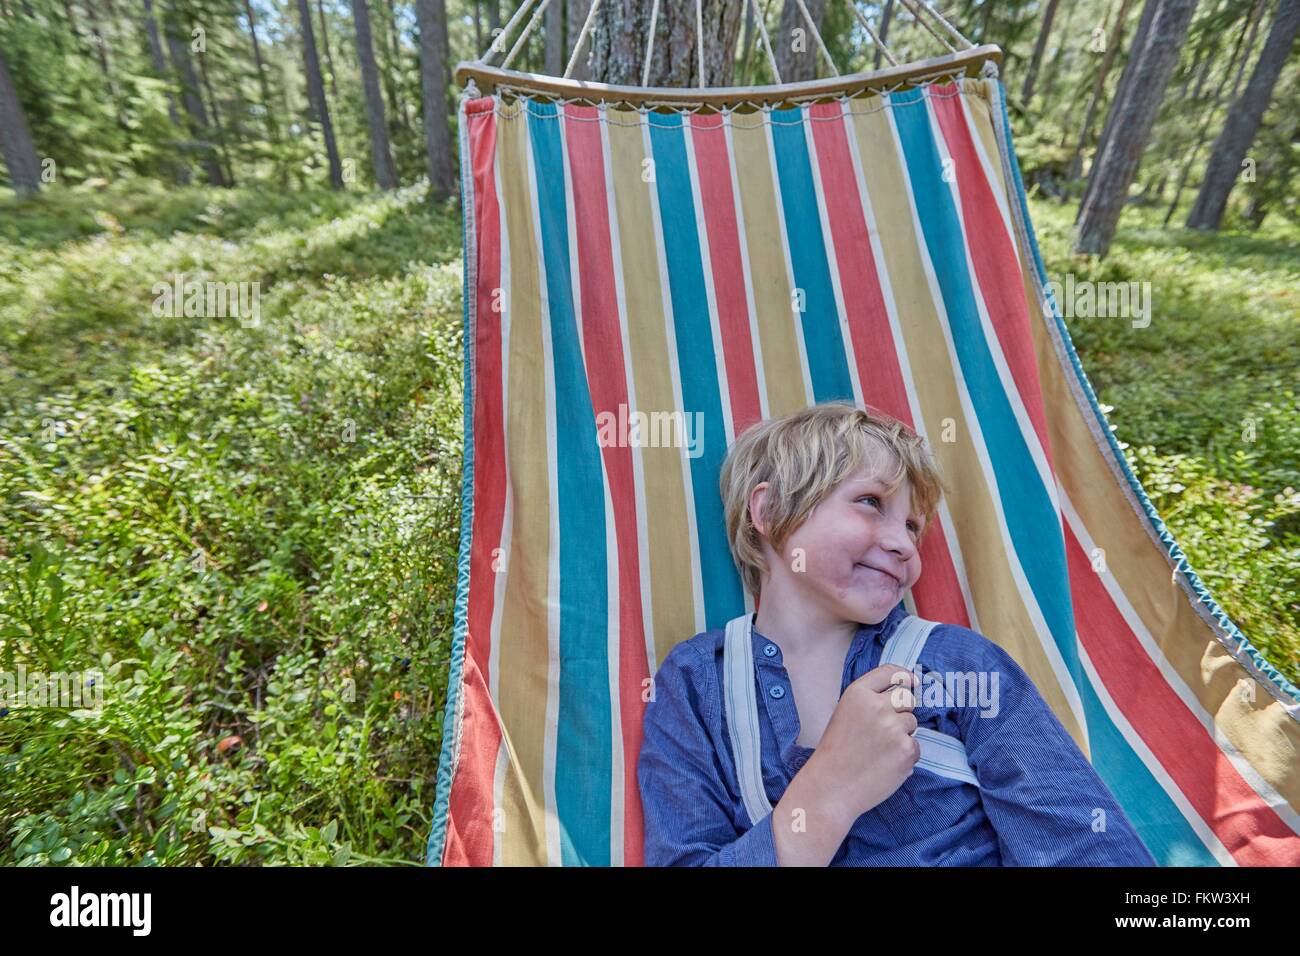 Mischievous boy dressed in retro clothing on forest hammock Stock Photo